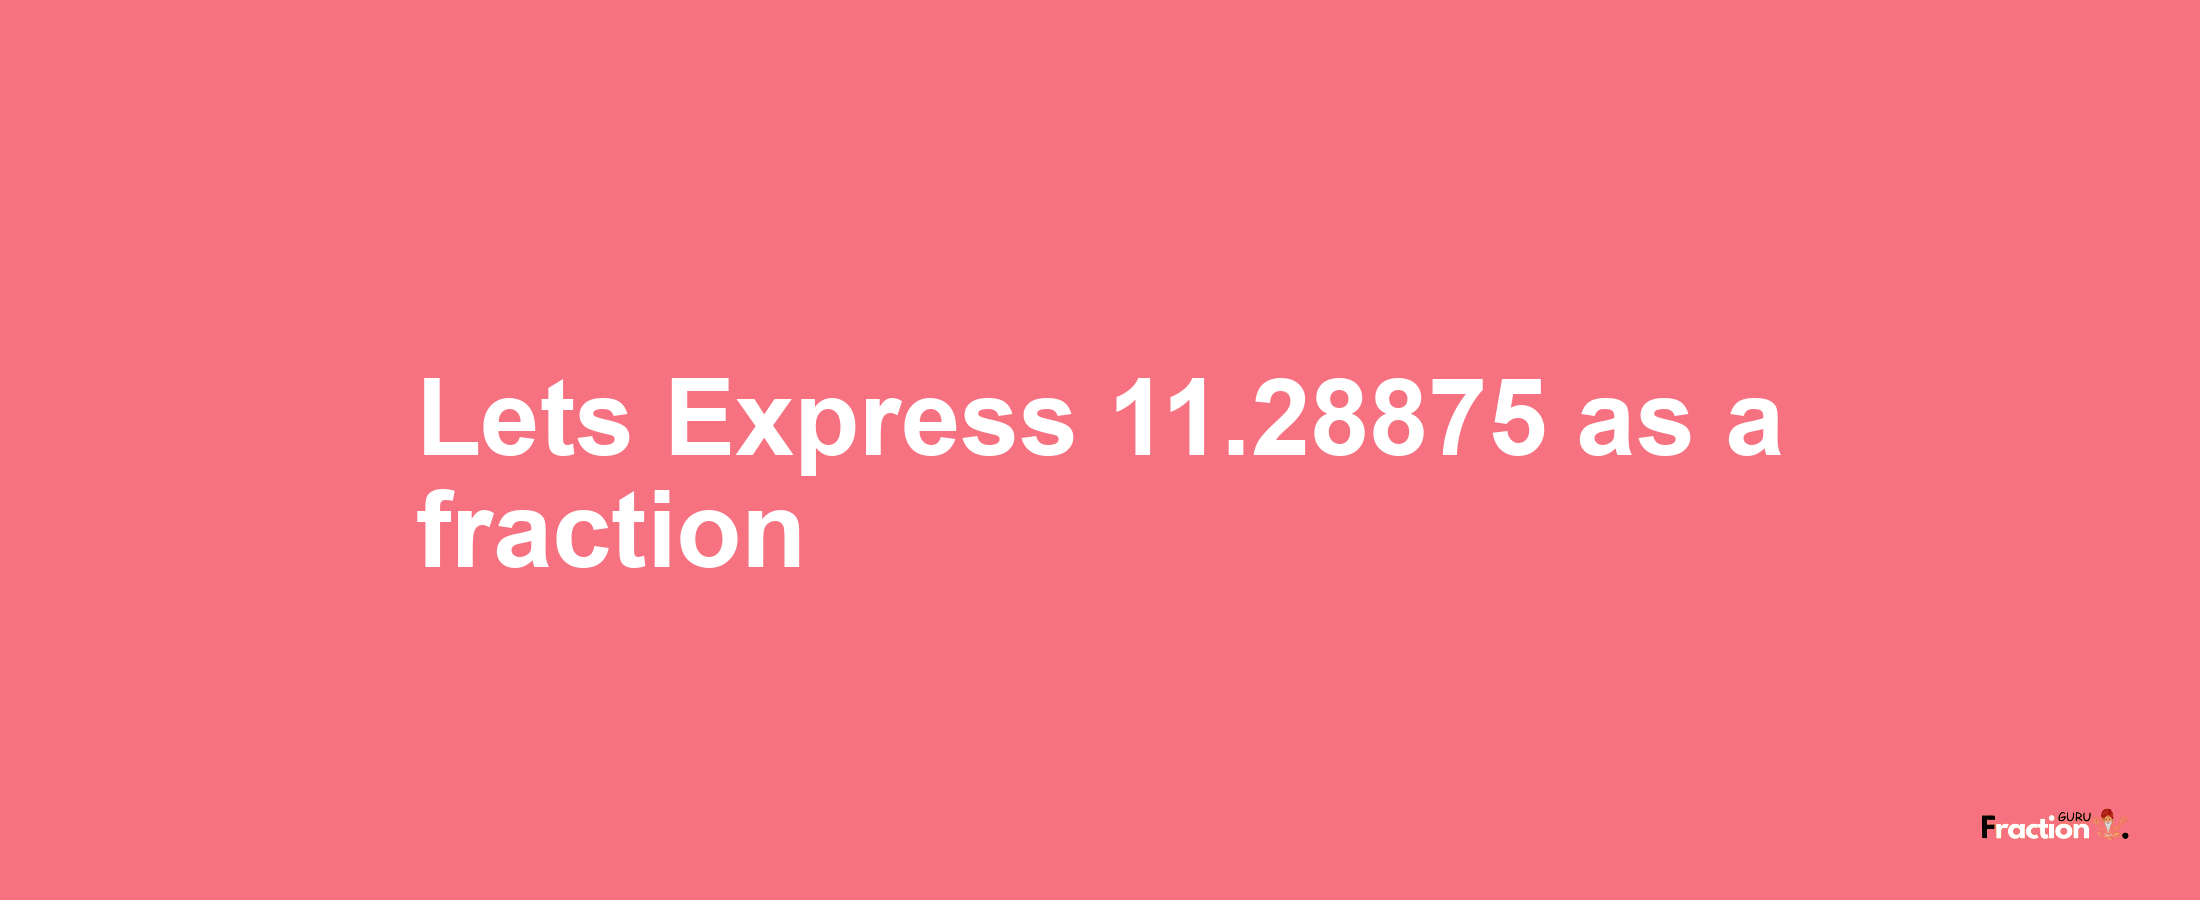 Lets Express 11.28875 as afraction